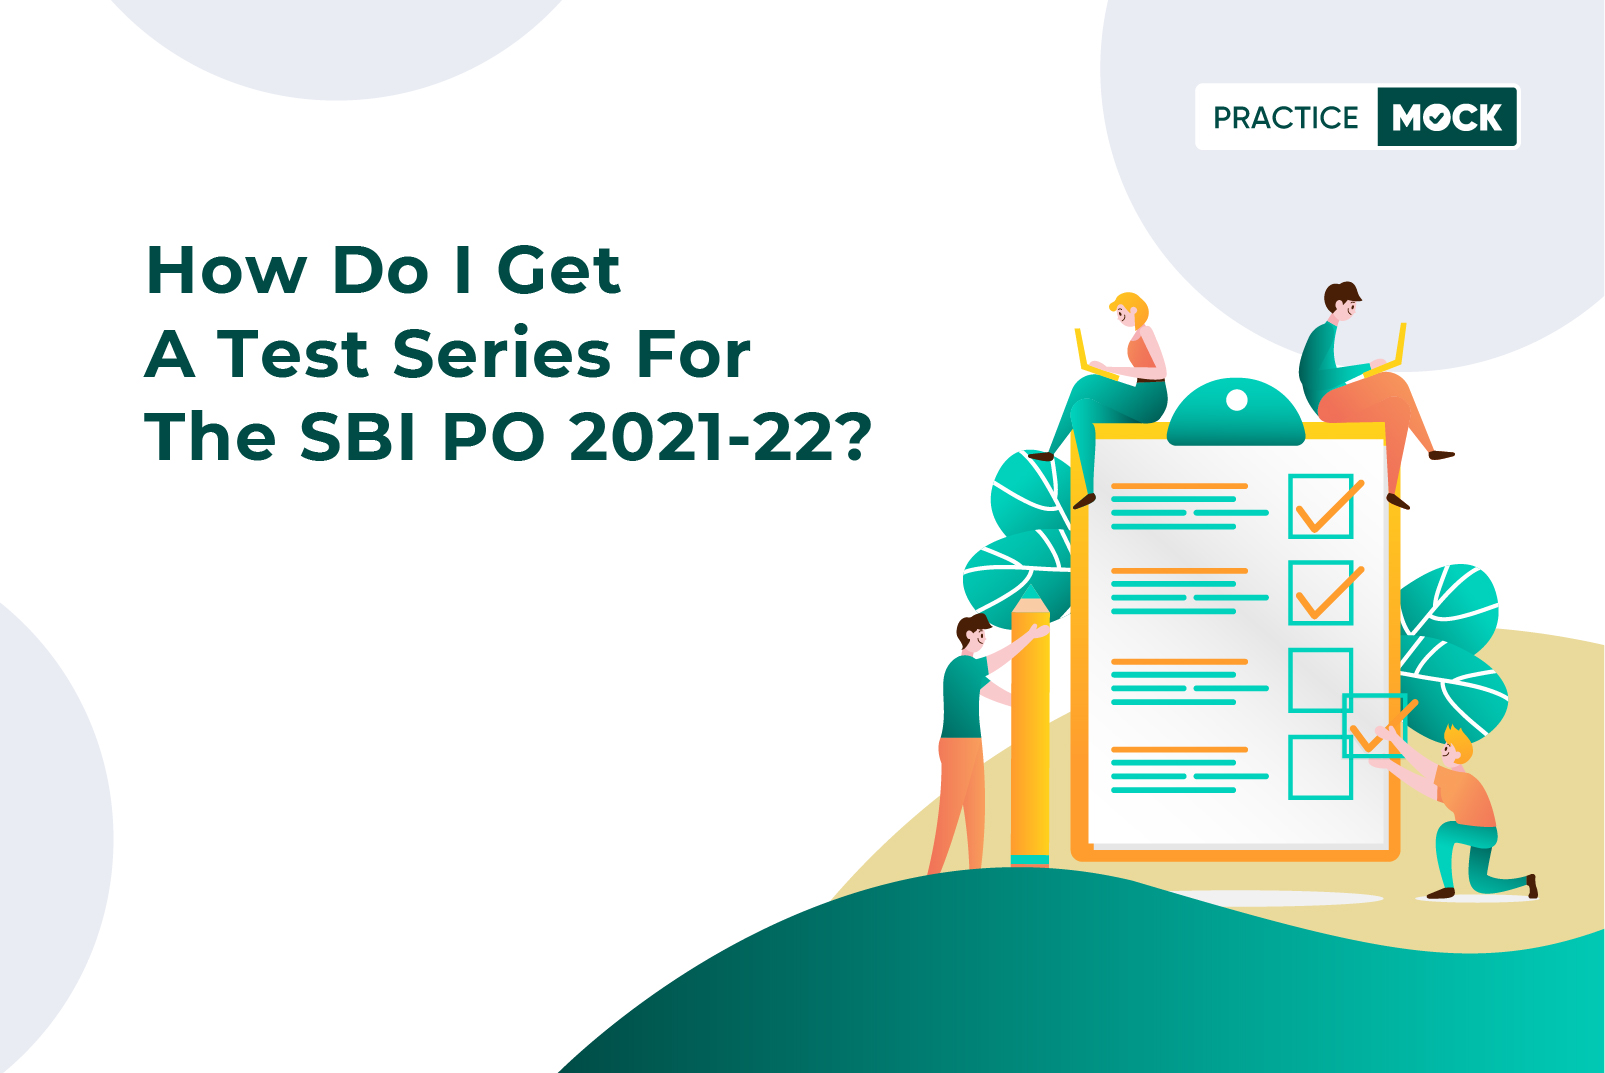 How do I get a test series for SBI PO 2021-22?